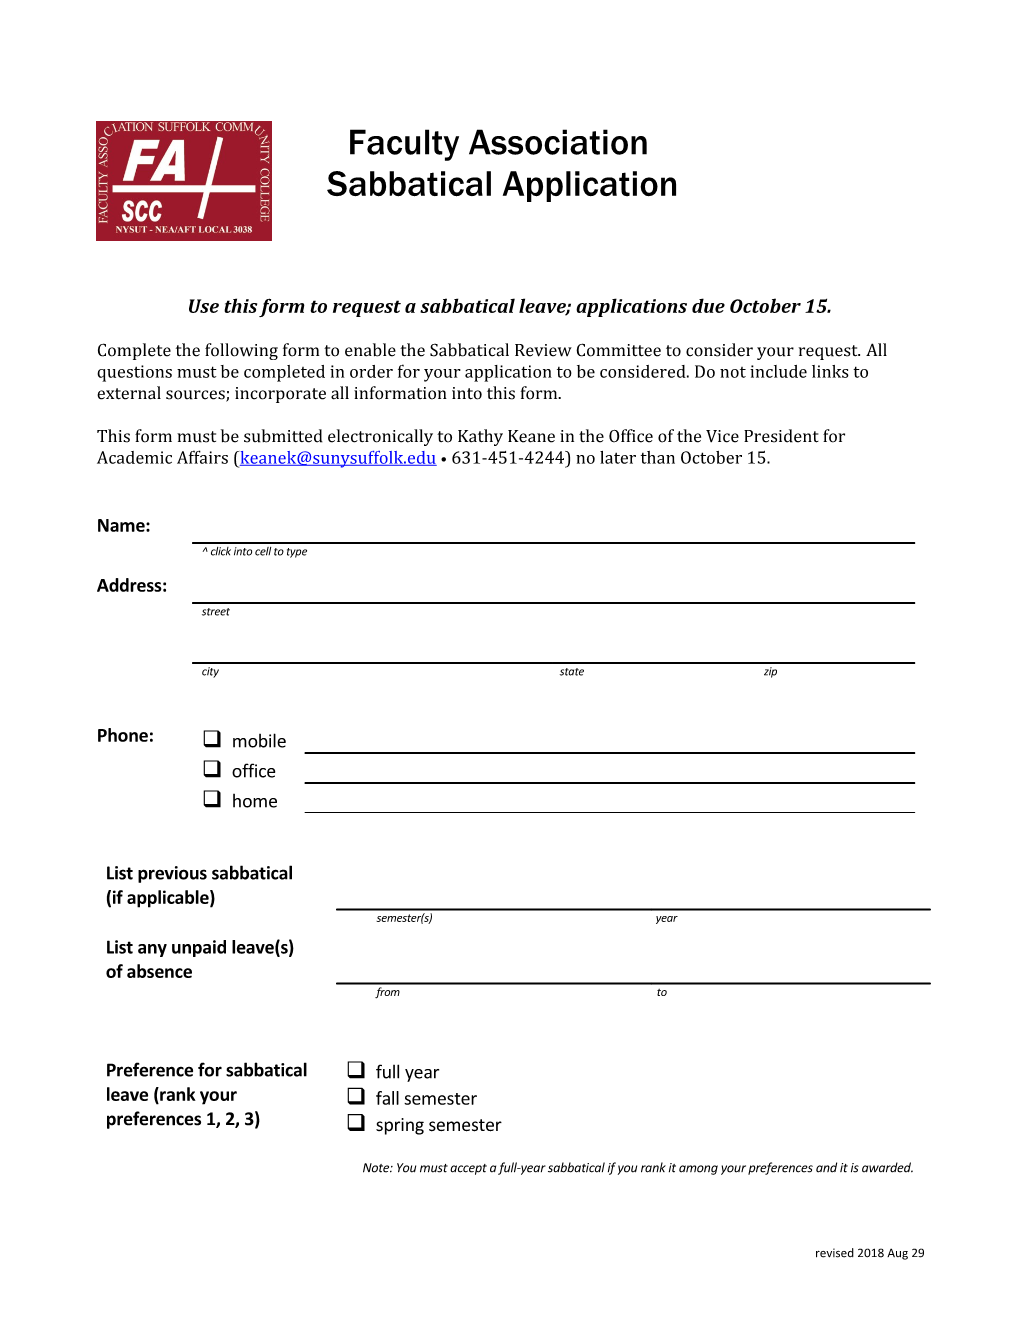 Use This Form to Requesta Sabbatical Leave; Applications Due October 15